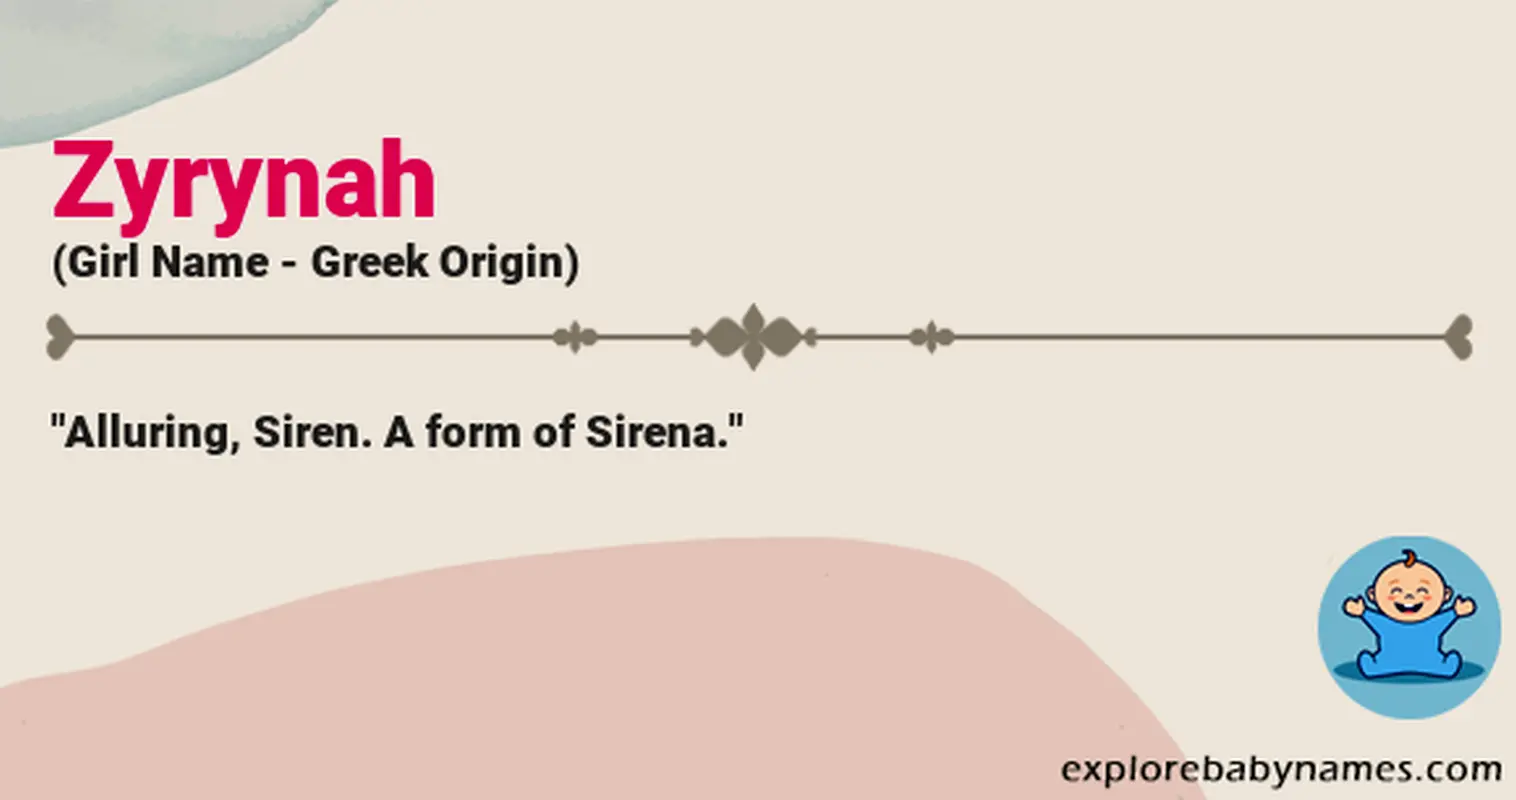 Meaning of Zyrynah